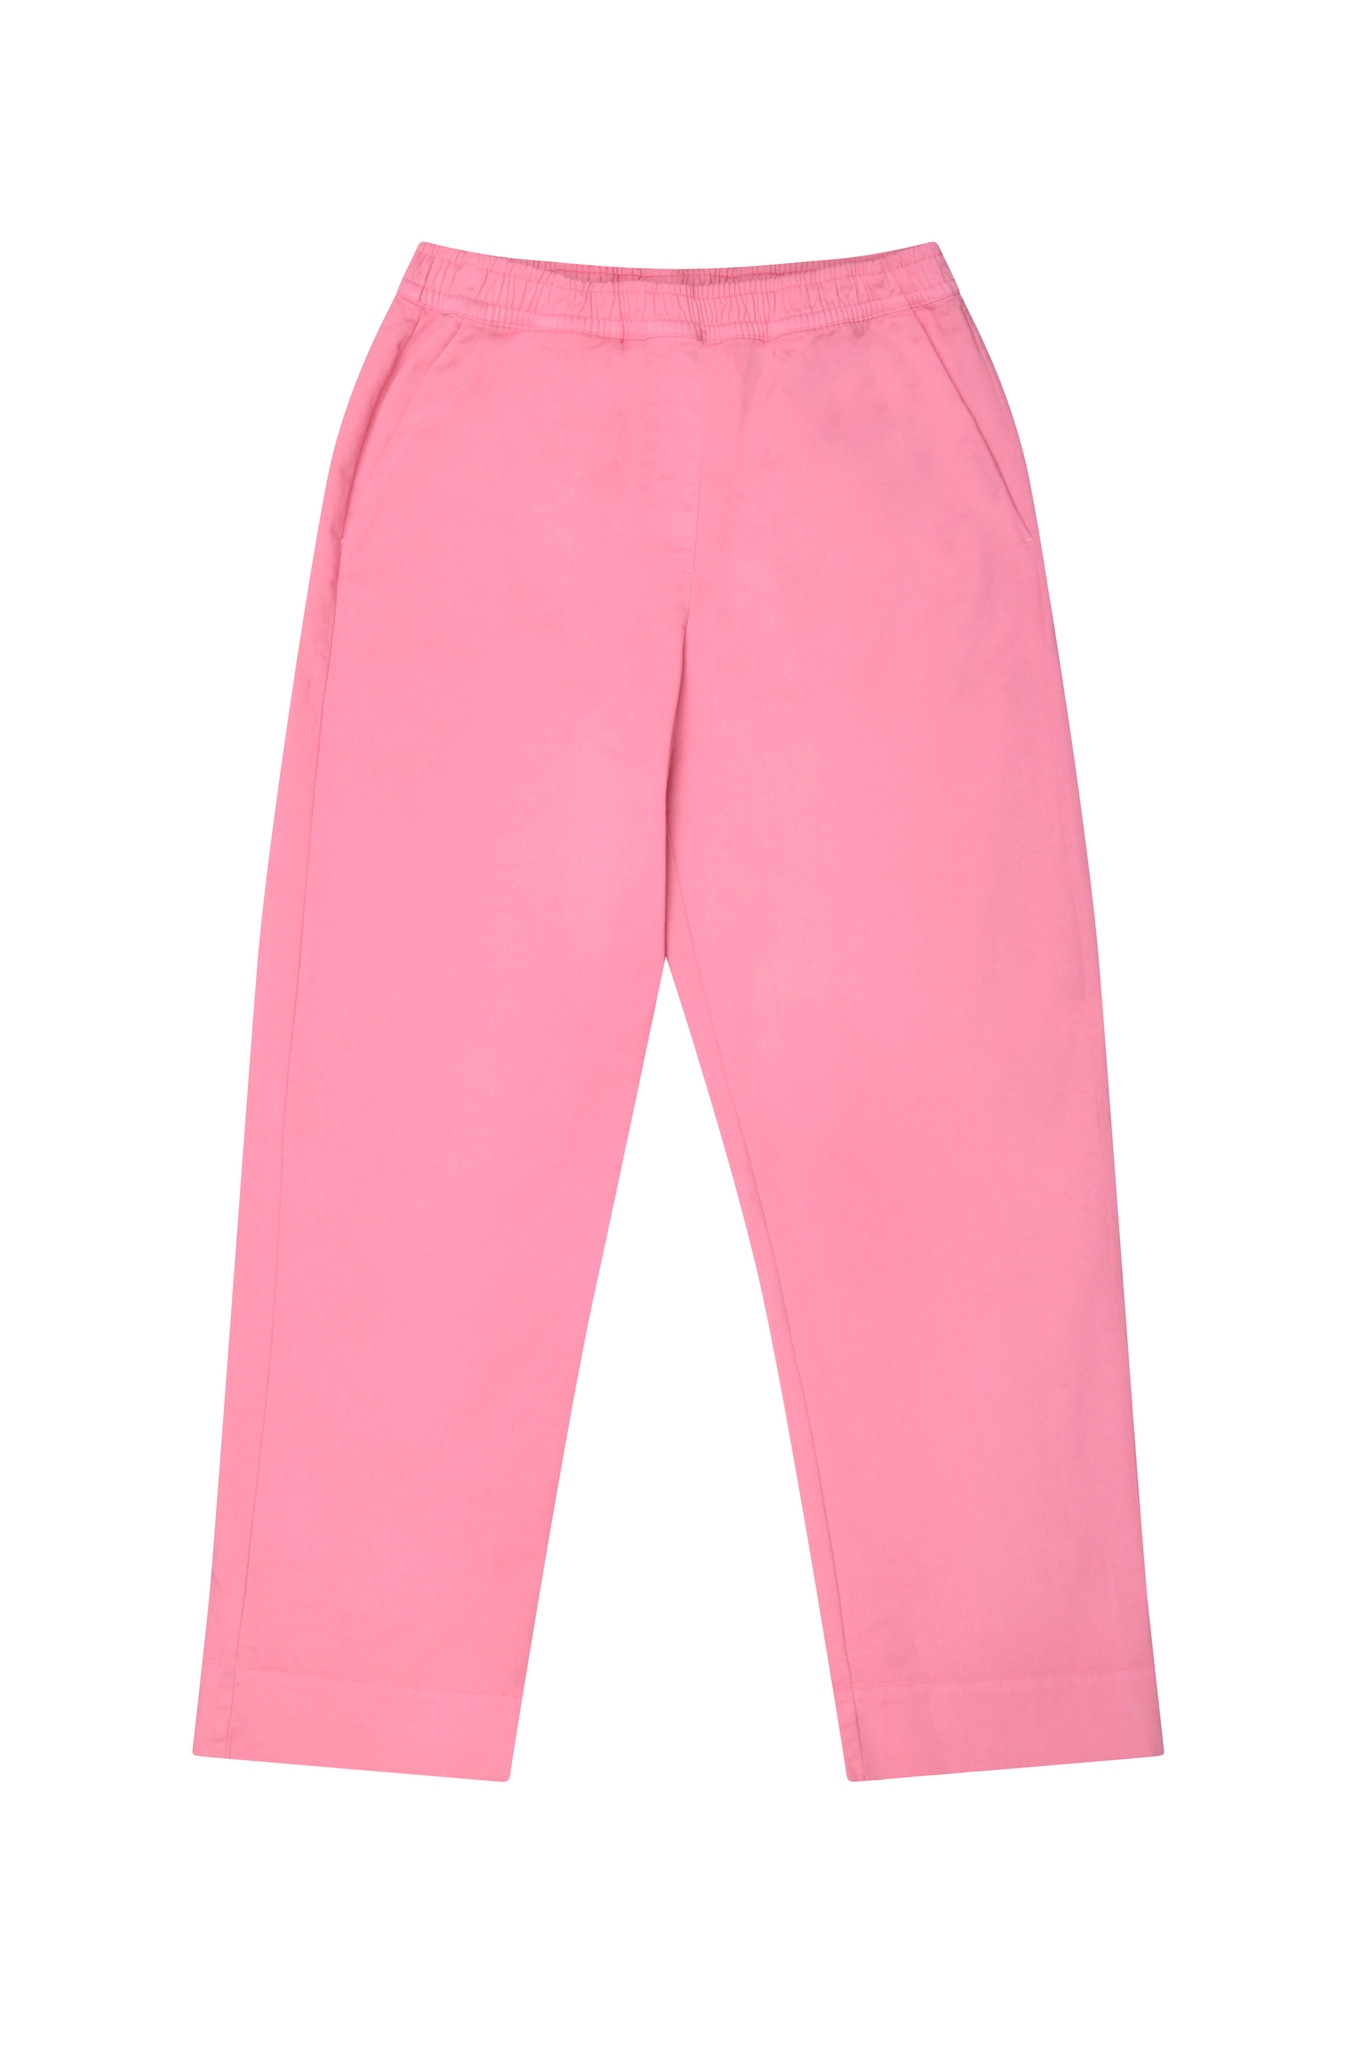 Palla Trousers in Bright Pink-1